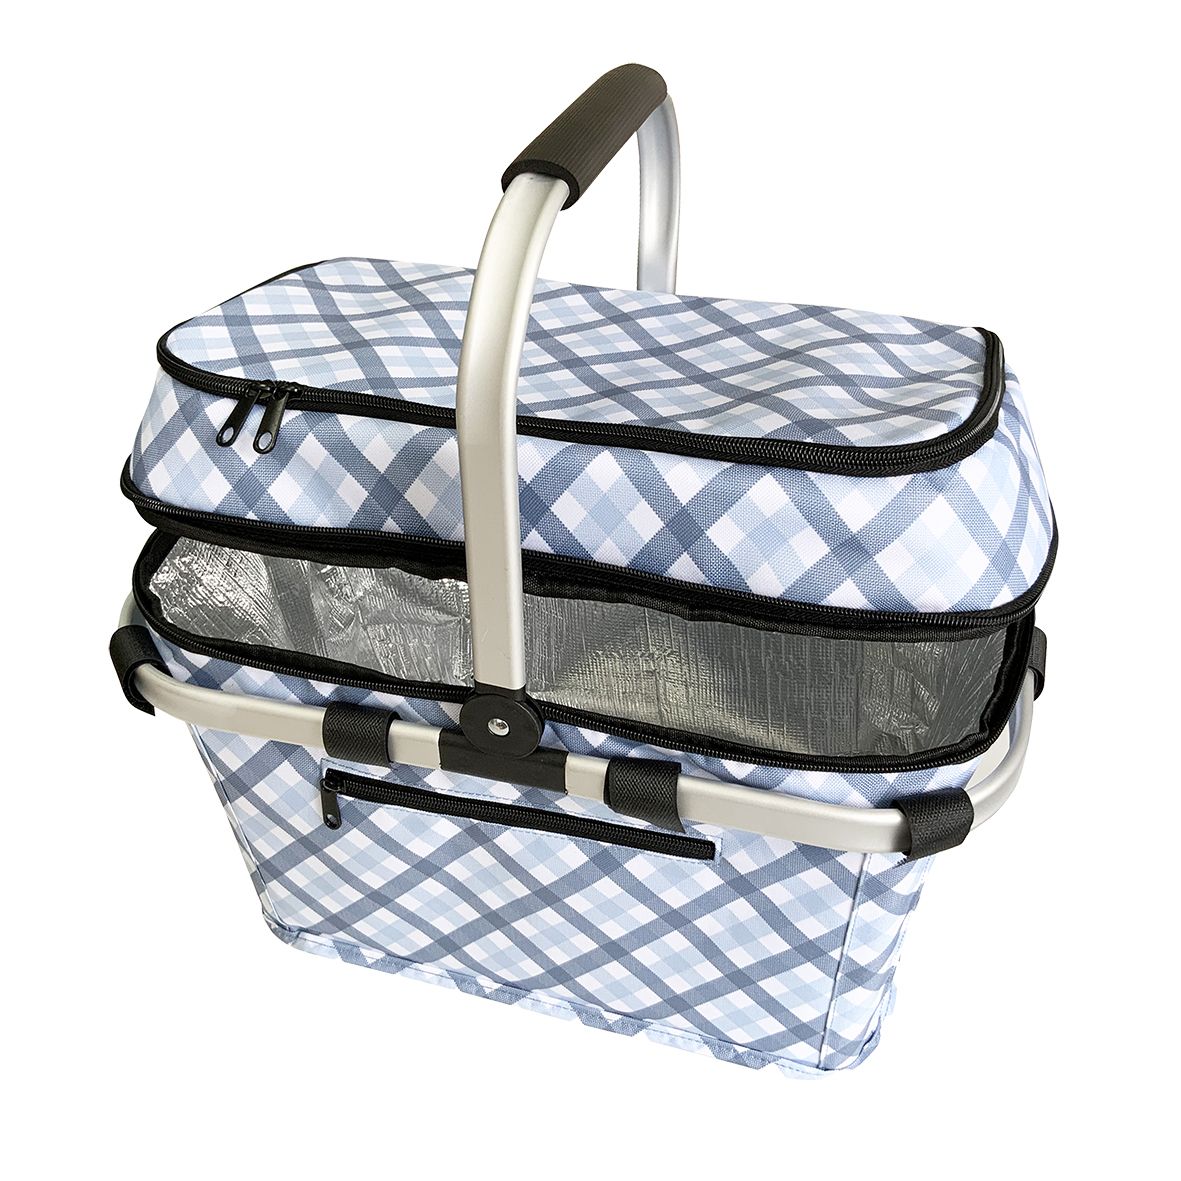 Sachi 4 Person Insulated Picnic Basket Gingham Product Image 3